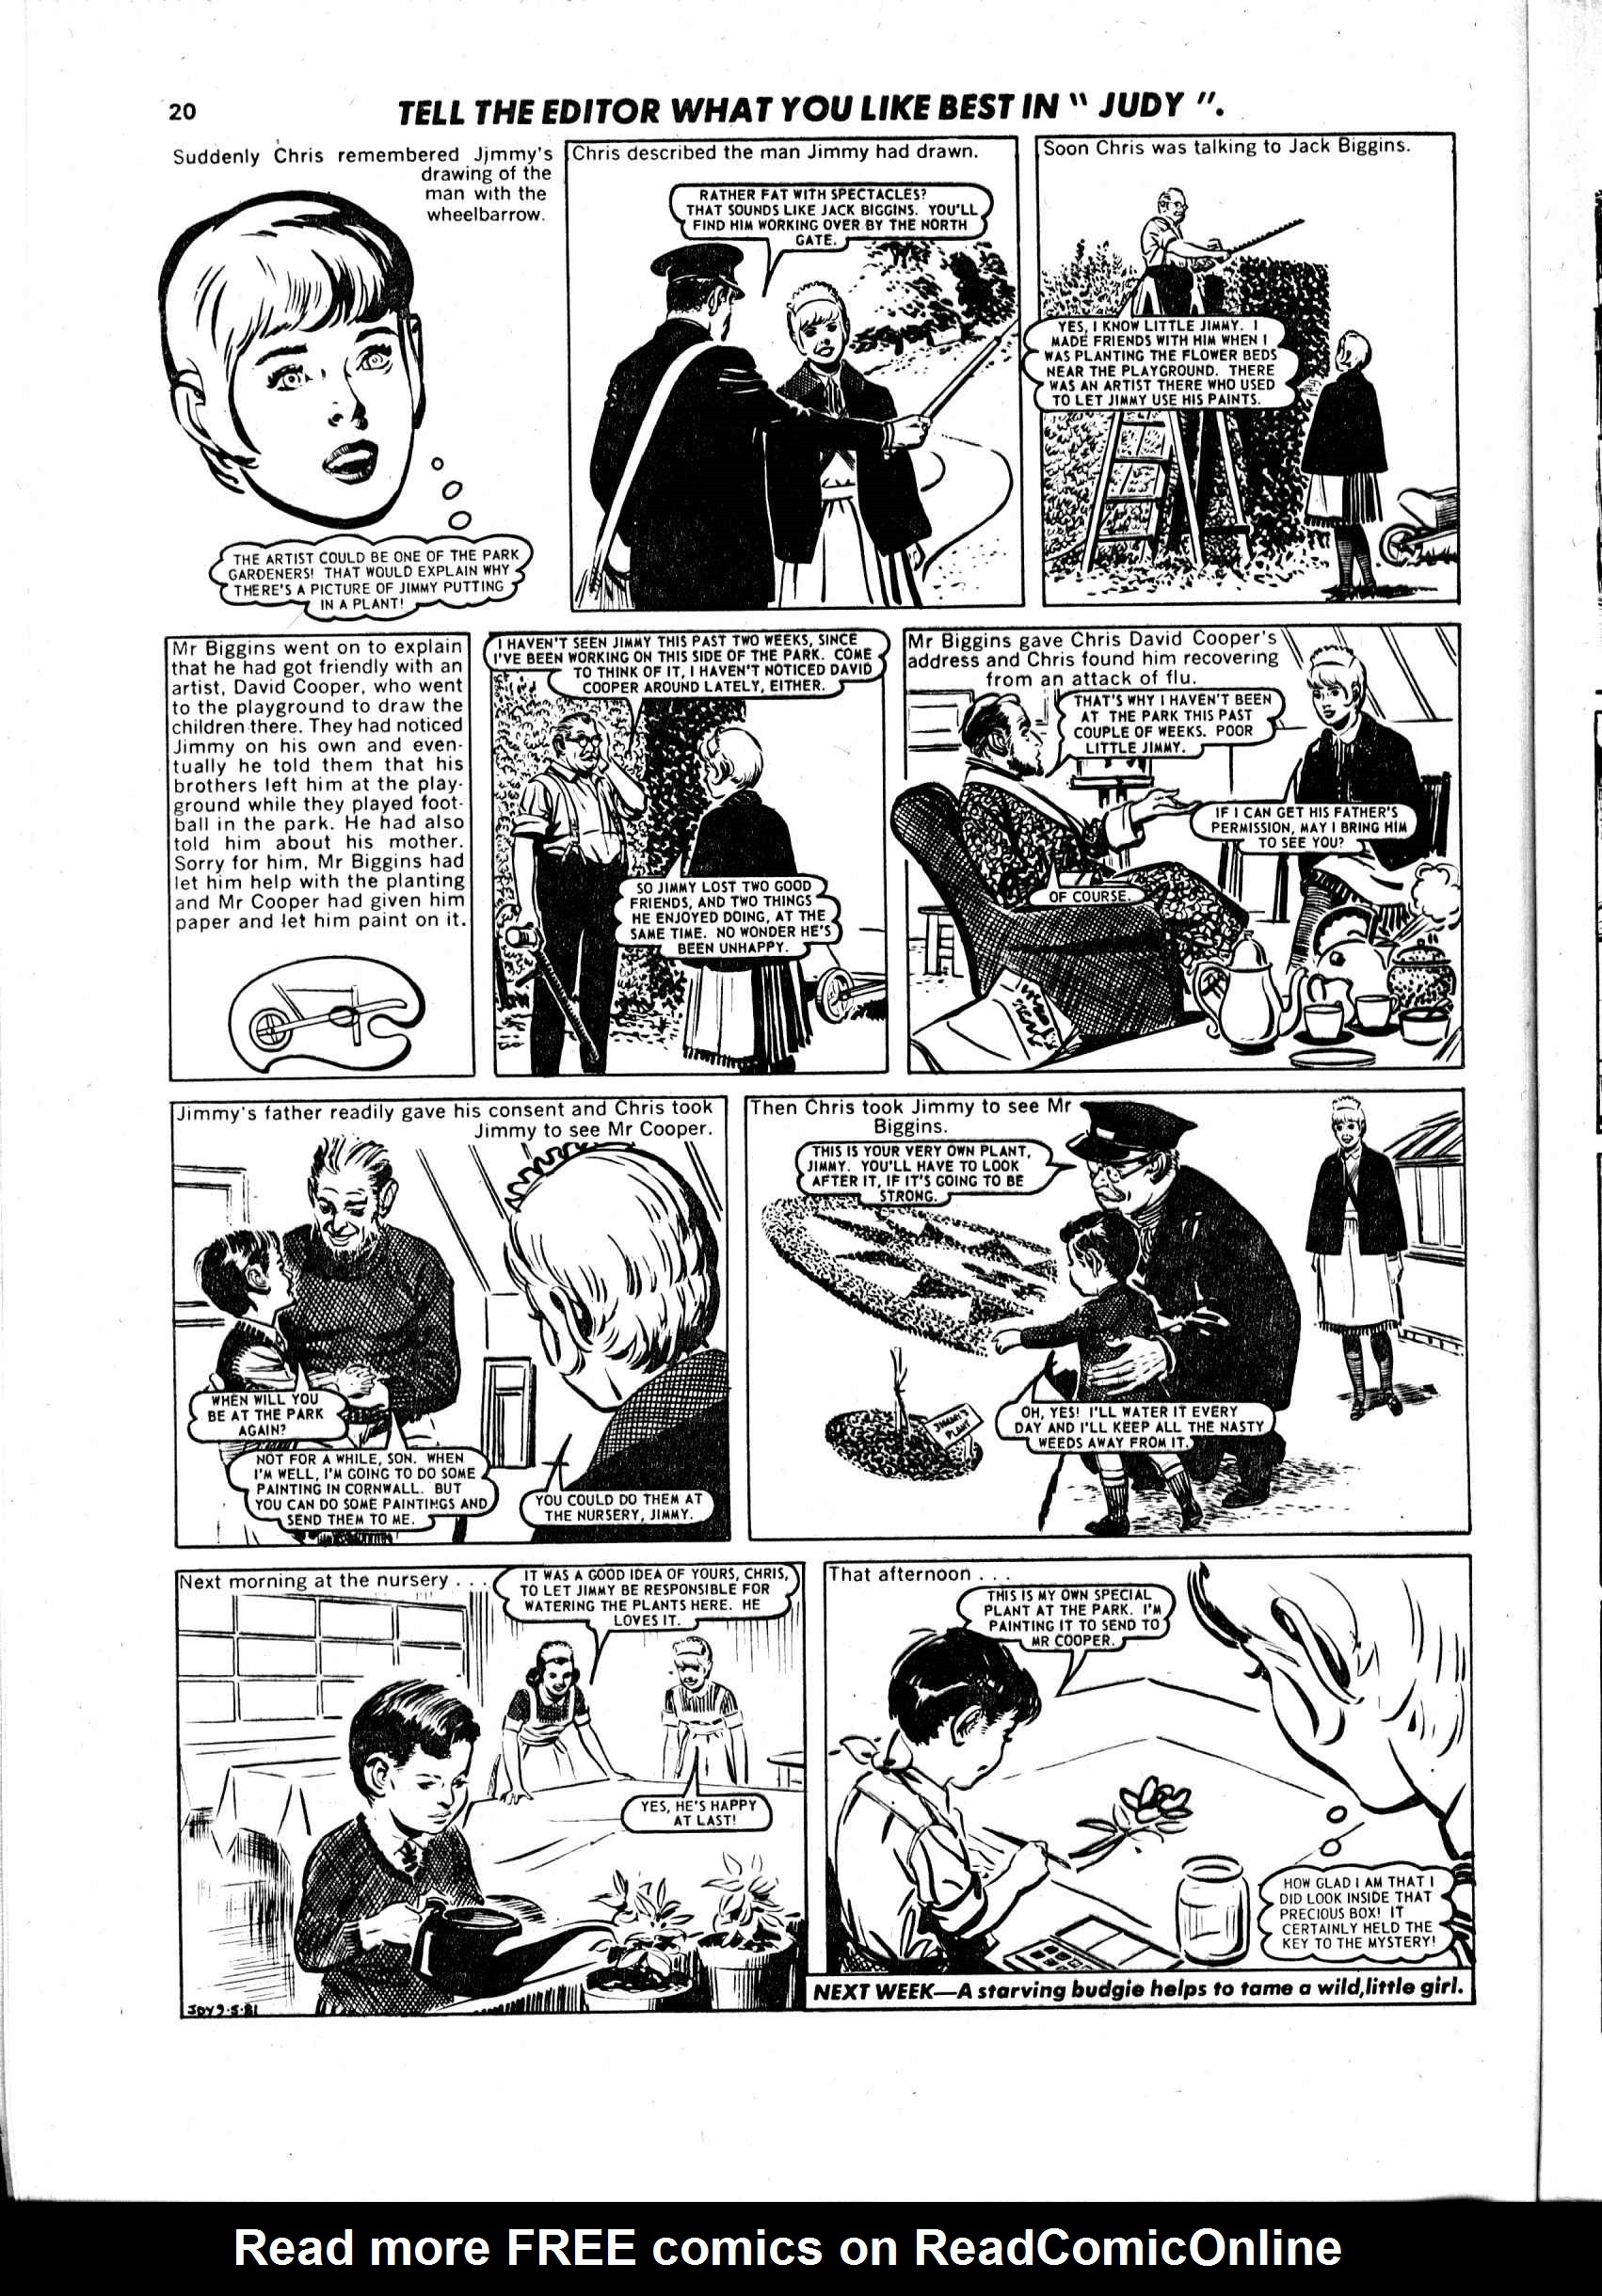 Read online Judy comic -  Issue #1113 - 20